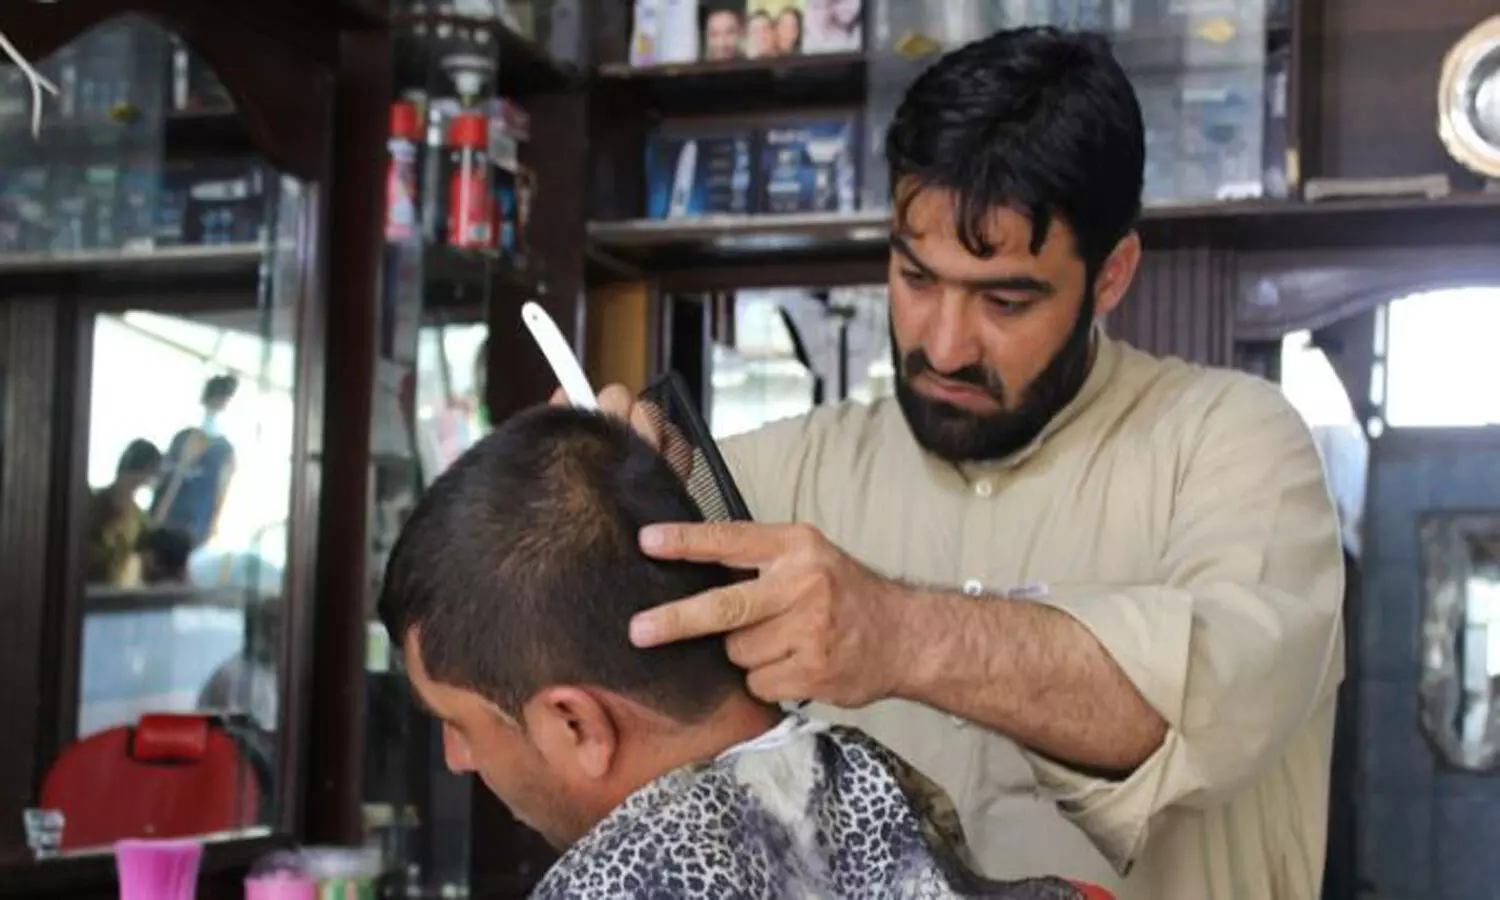 Taliban ban barbers in Helmand from shaving and trimming beards